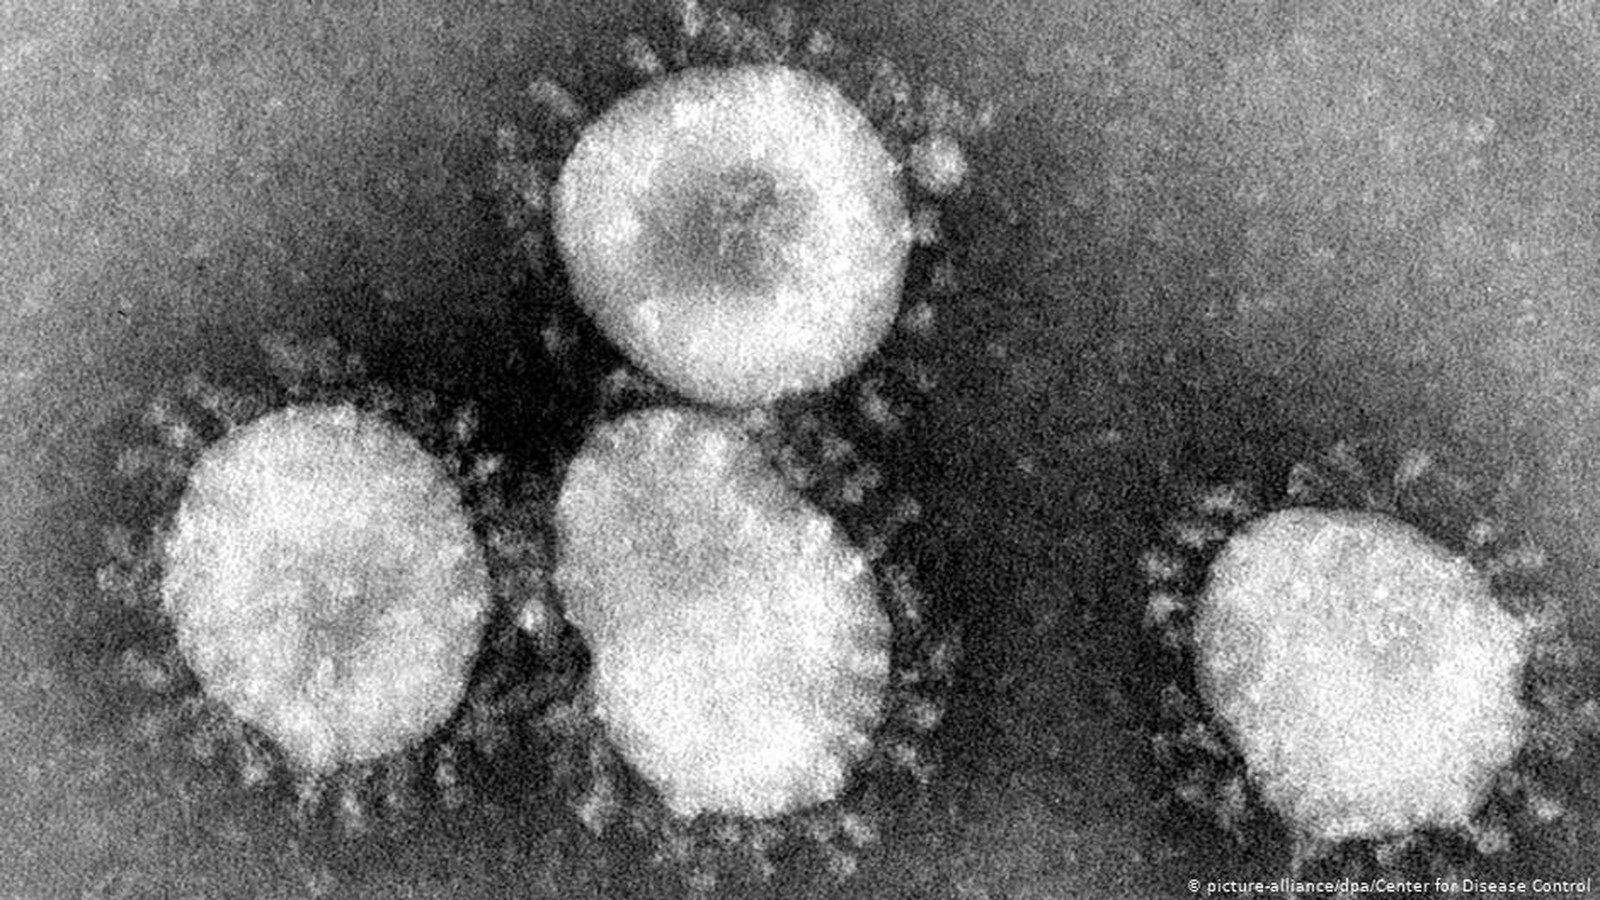 The Ministry of Health reported on Wednesday, March 4th, that it is investigating a potential new confirmed case of the new coronavirus.